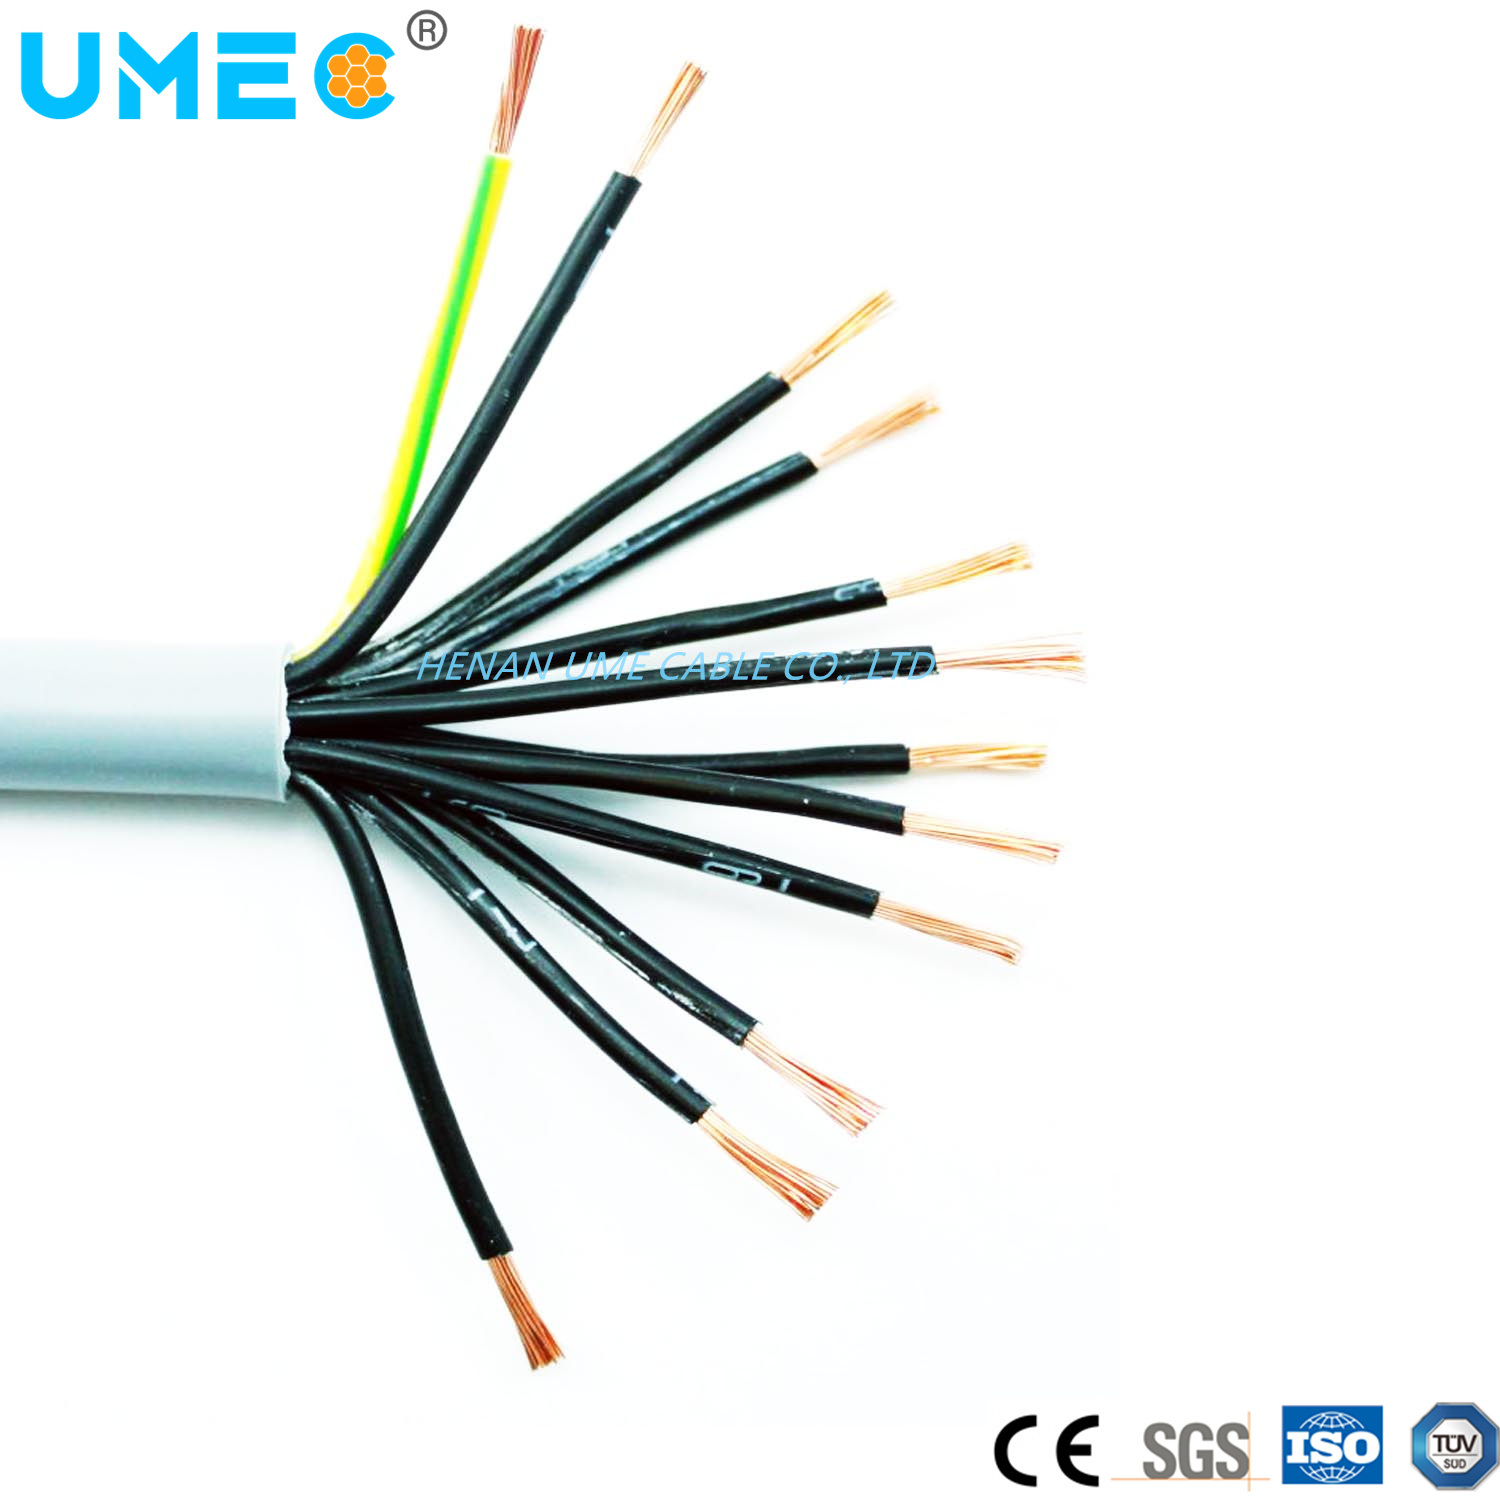 IEC 60228 Standard 300V Power Transport Control Cable Ysly-Jz 10gx1.5mm2 Multicore Cable